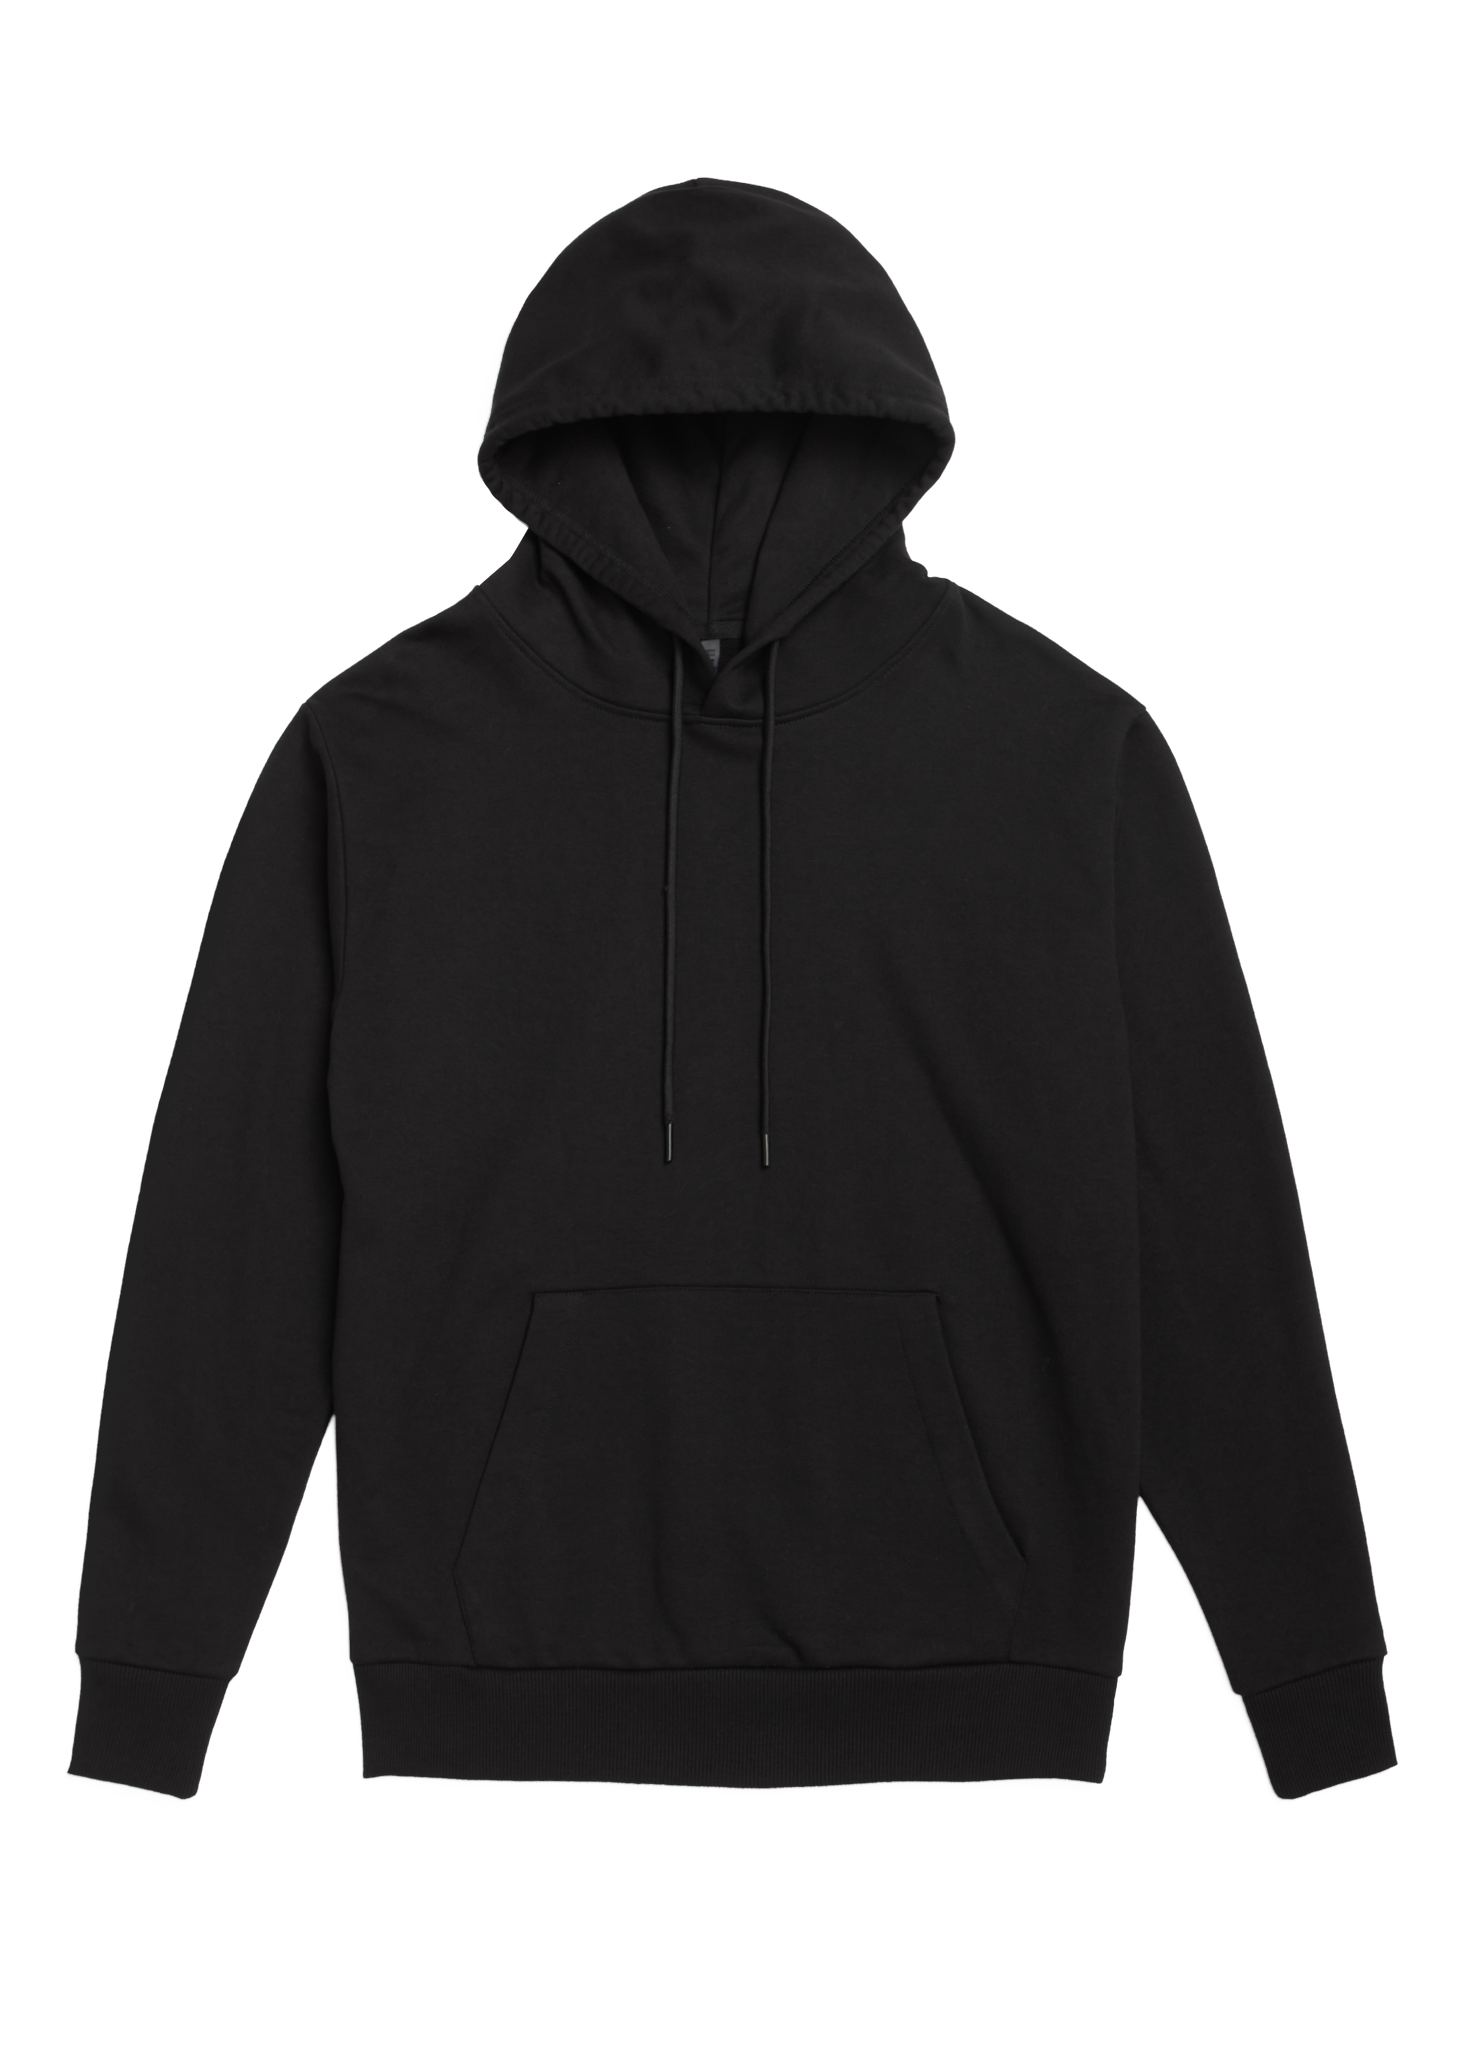 H4X BASEWEAR BLACK UNISEX FRENCH TERRY HOODIE - H4X